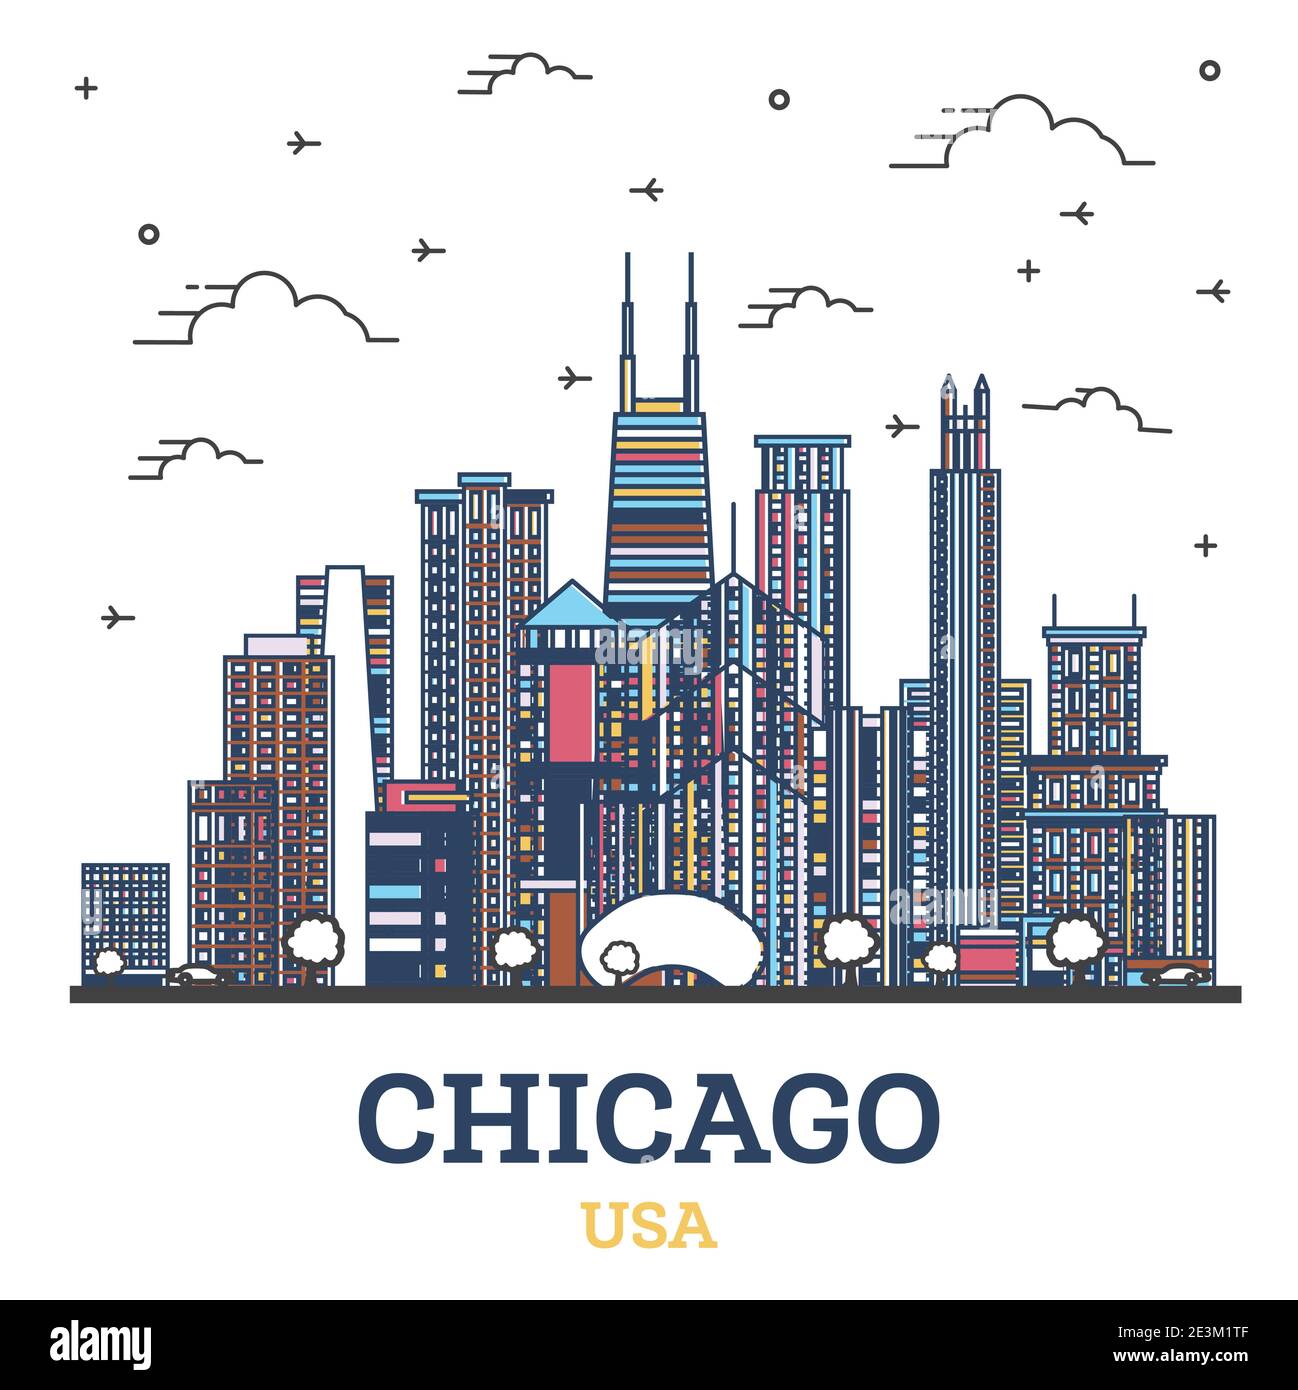 Outline Chicago Illinois USA City Skyline with Colored Modern Buildings Isolated on White. Vector Illustration. Chicago Cityscape with Landmarks. Stock Vector